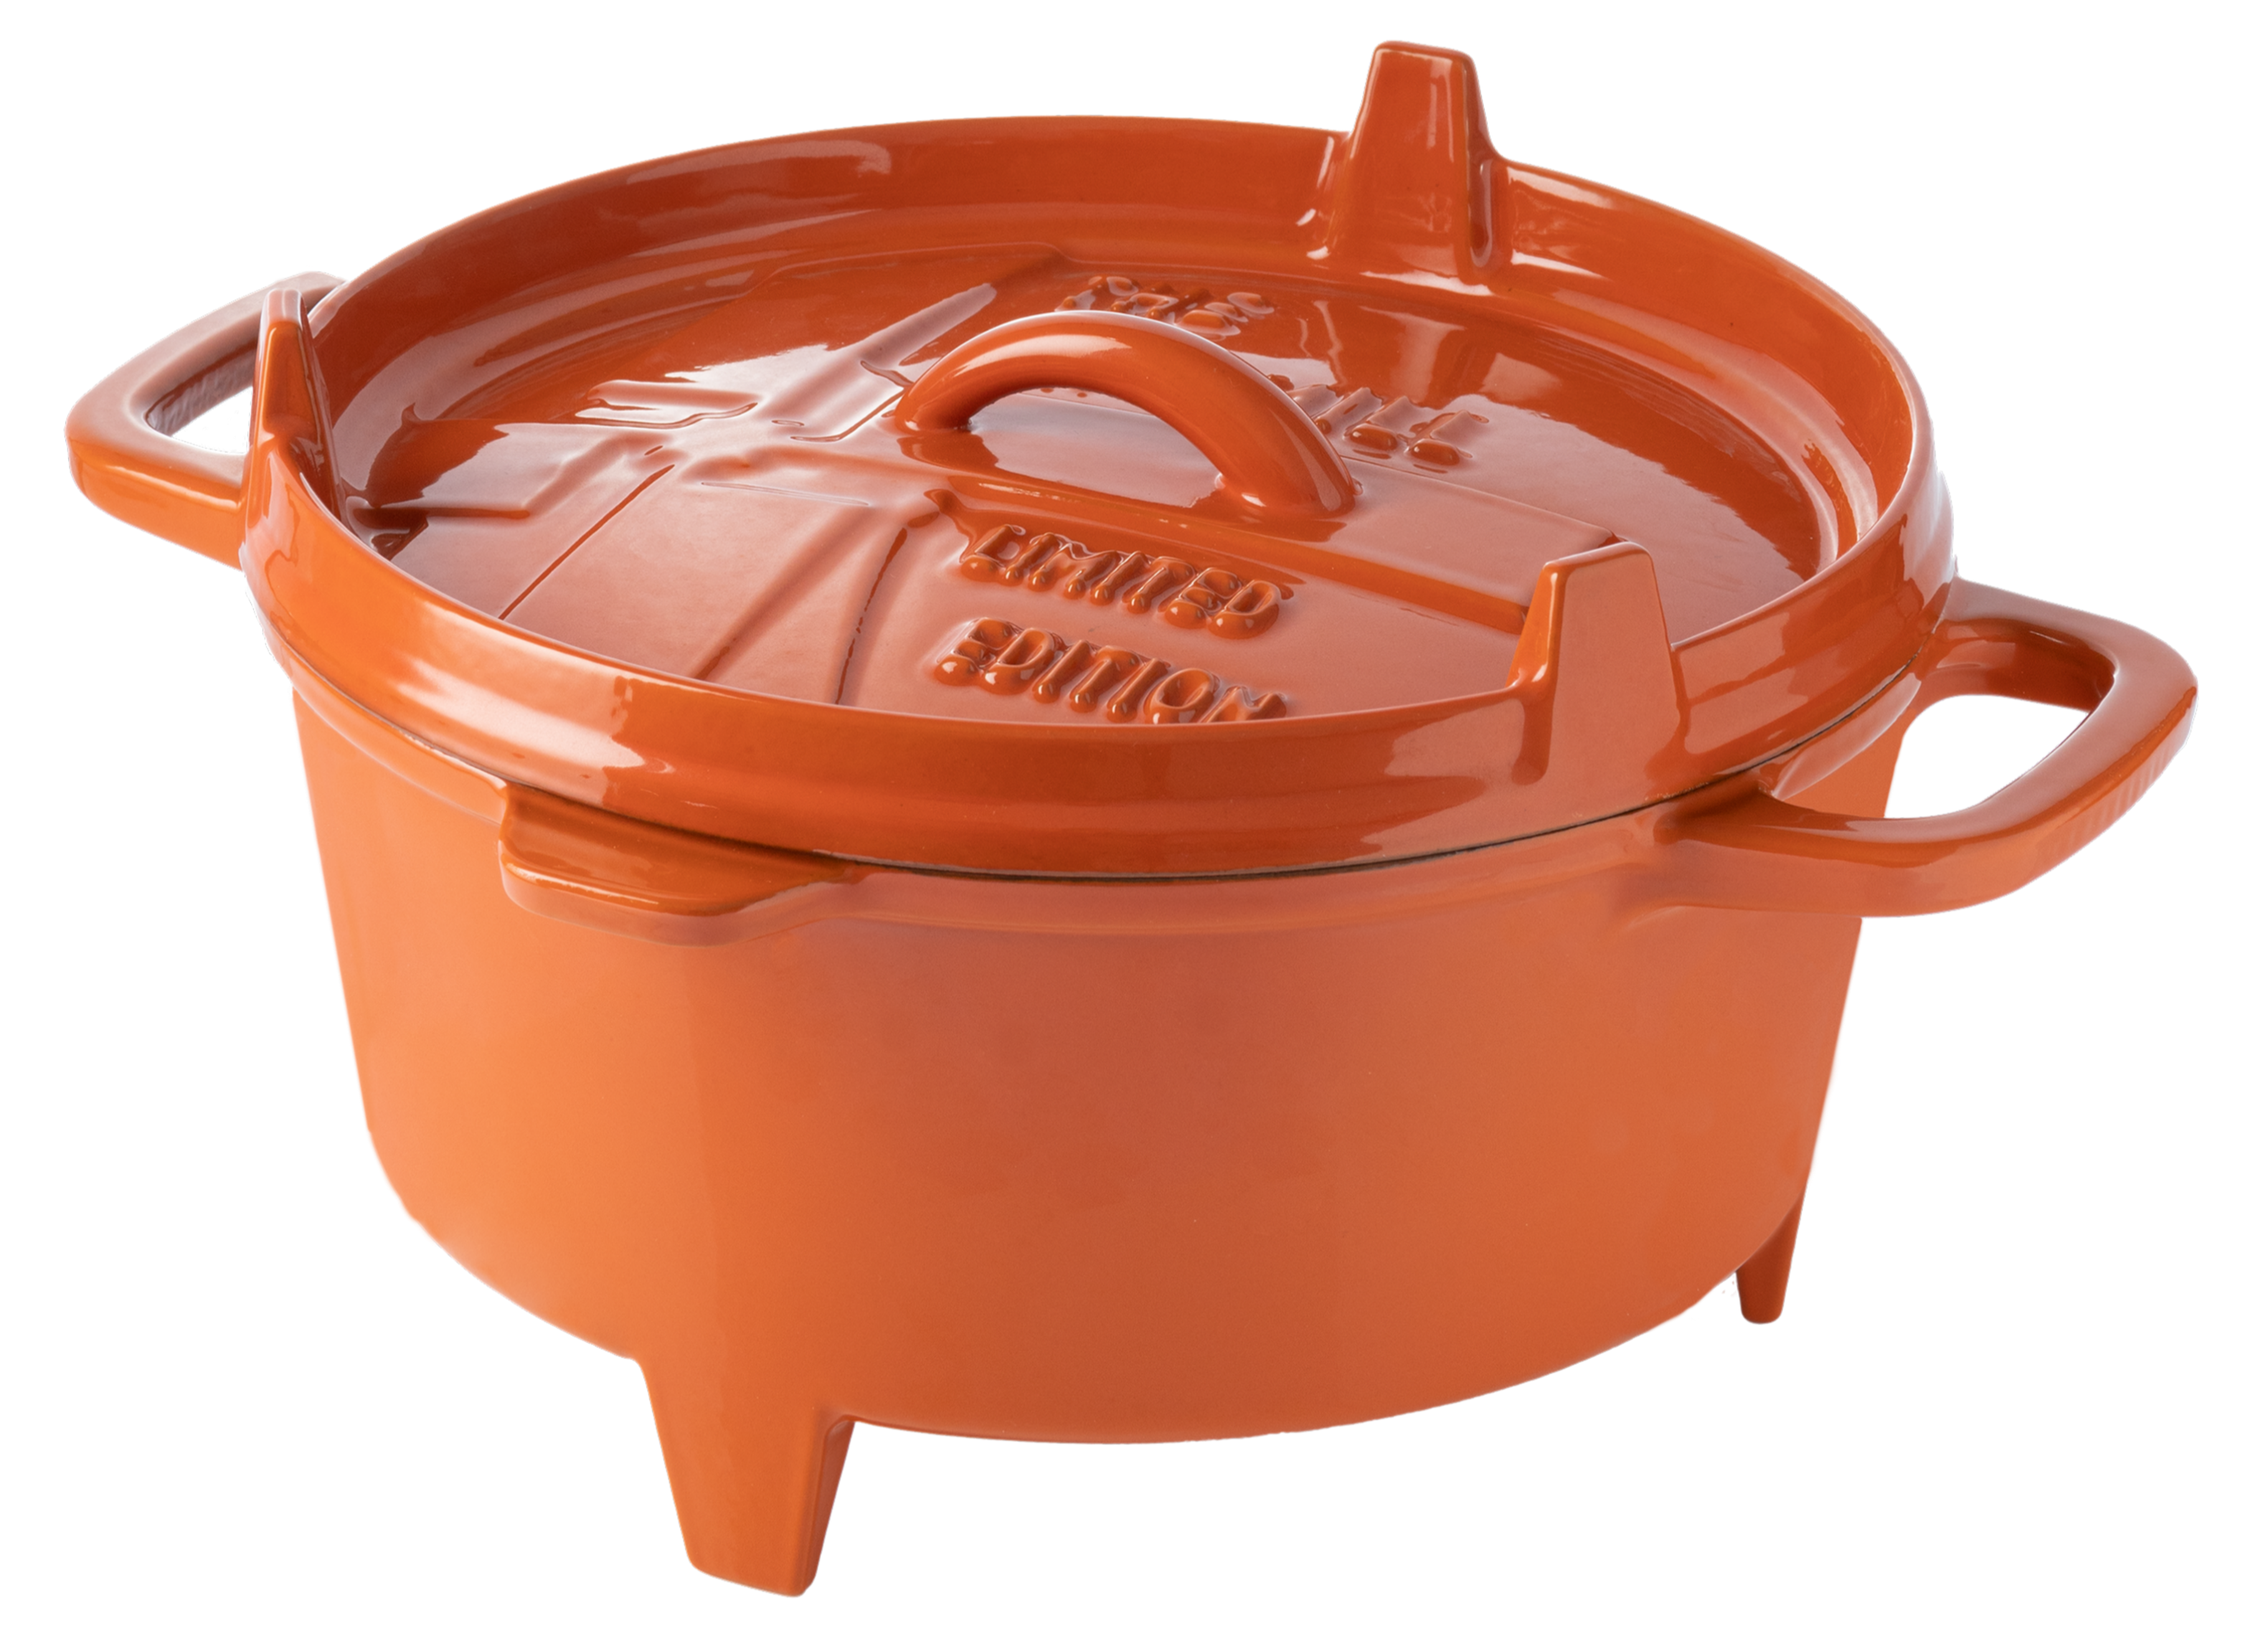 The Windmill Dutch Oven 4,5 Qt Limited Edition Geëmailleerd